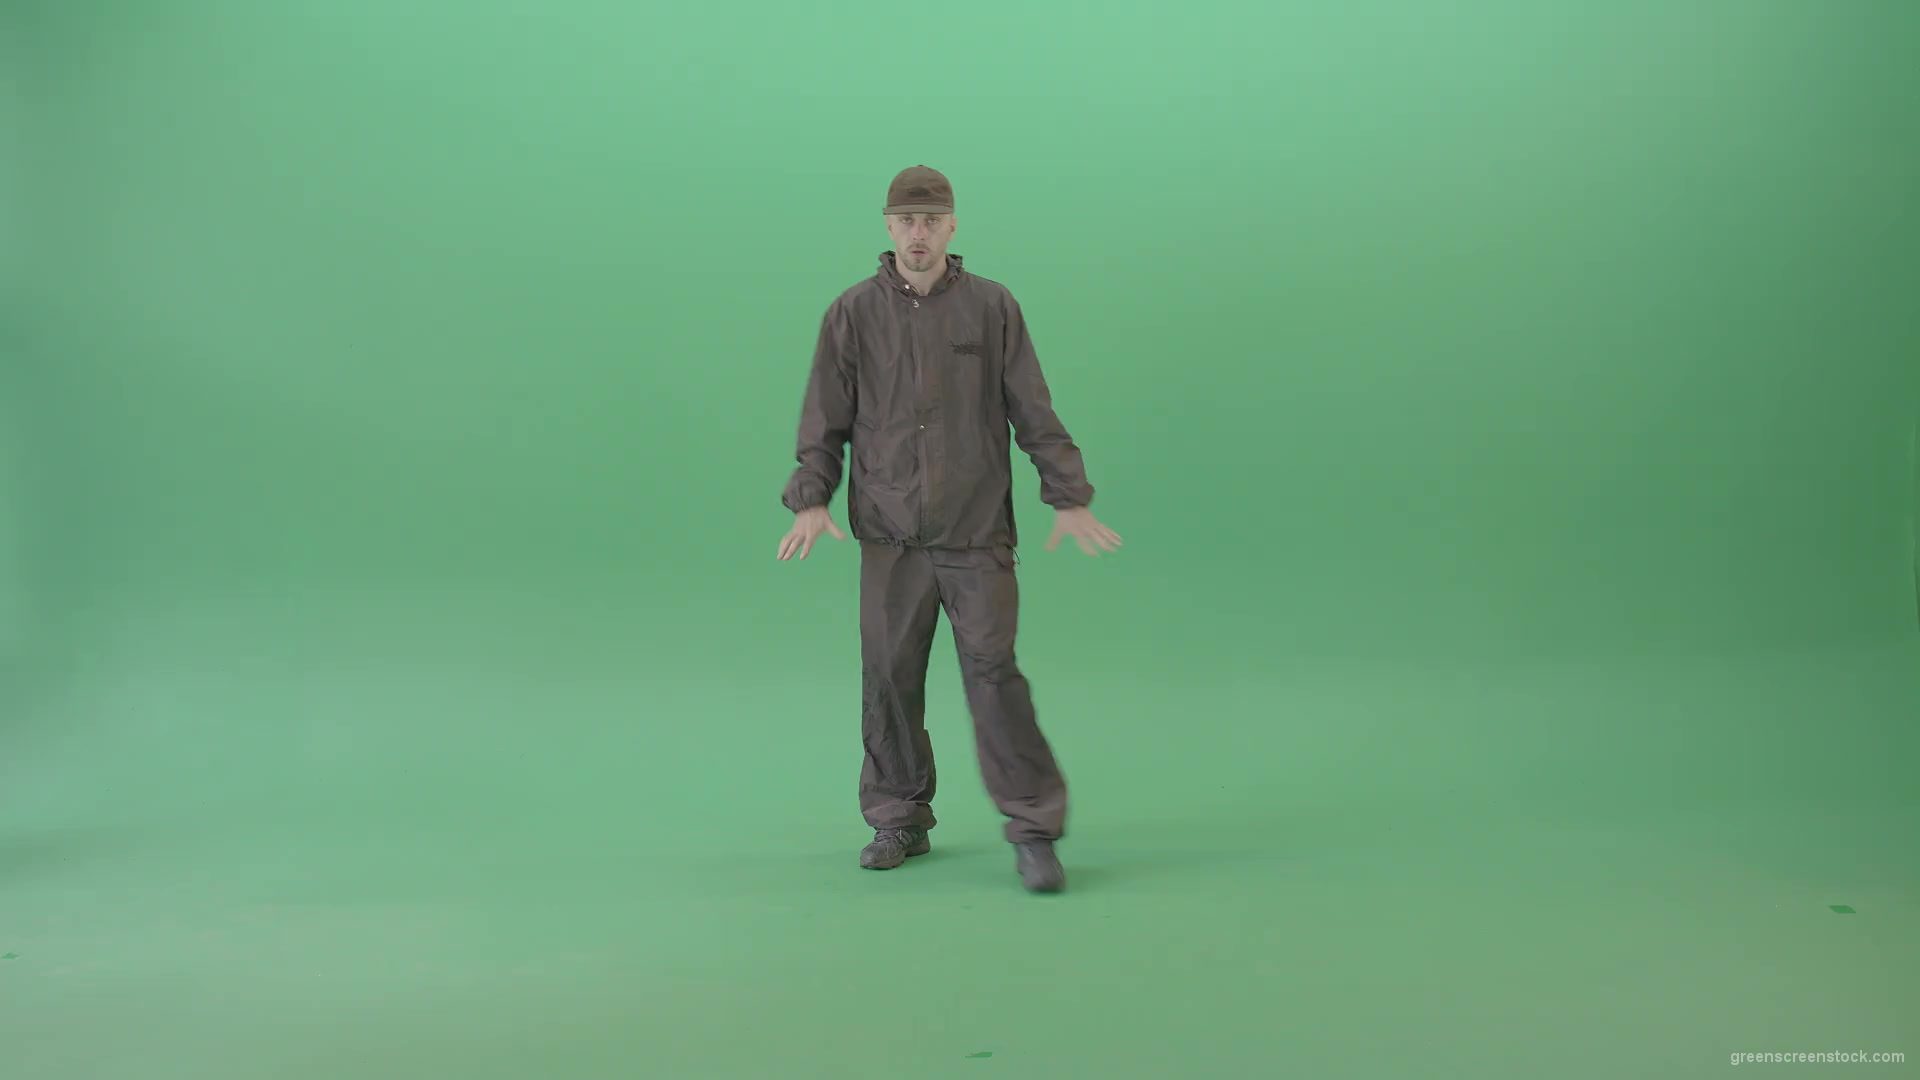 Top-Break-dance-by-electric-boogie-hip-hop-dancer-isolated-on-green-screen-4K-Video-Footage-1920_001 Green Screen Stock